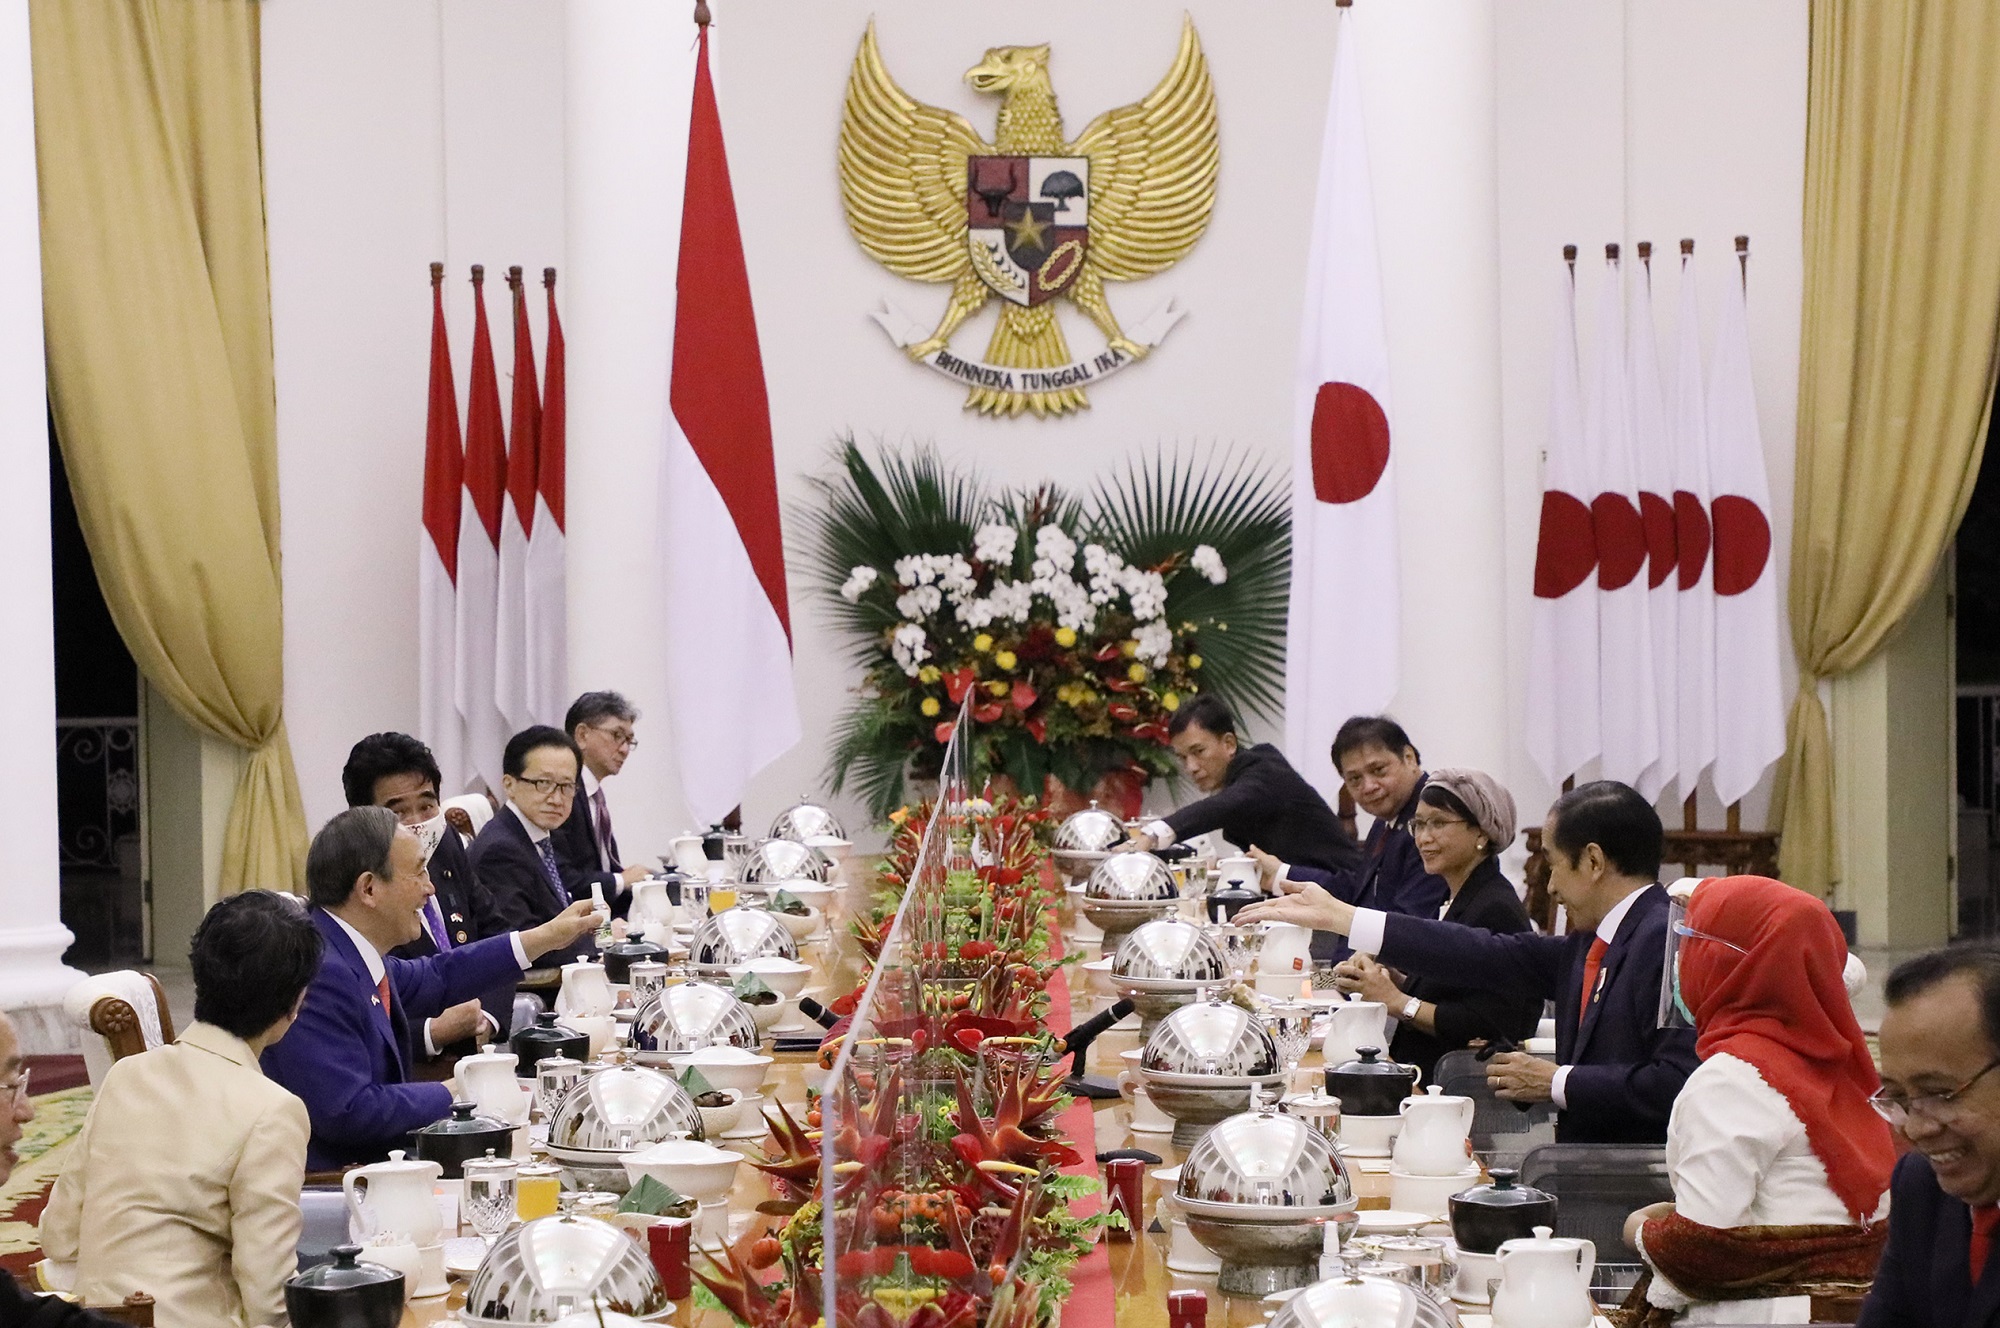 Photograph of the Prime Minister attending the dinner hosted by the President of Indonesia and his wife (2)